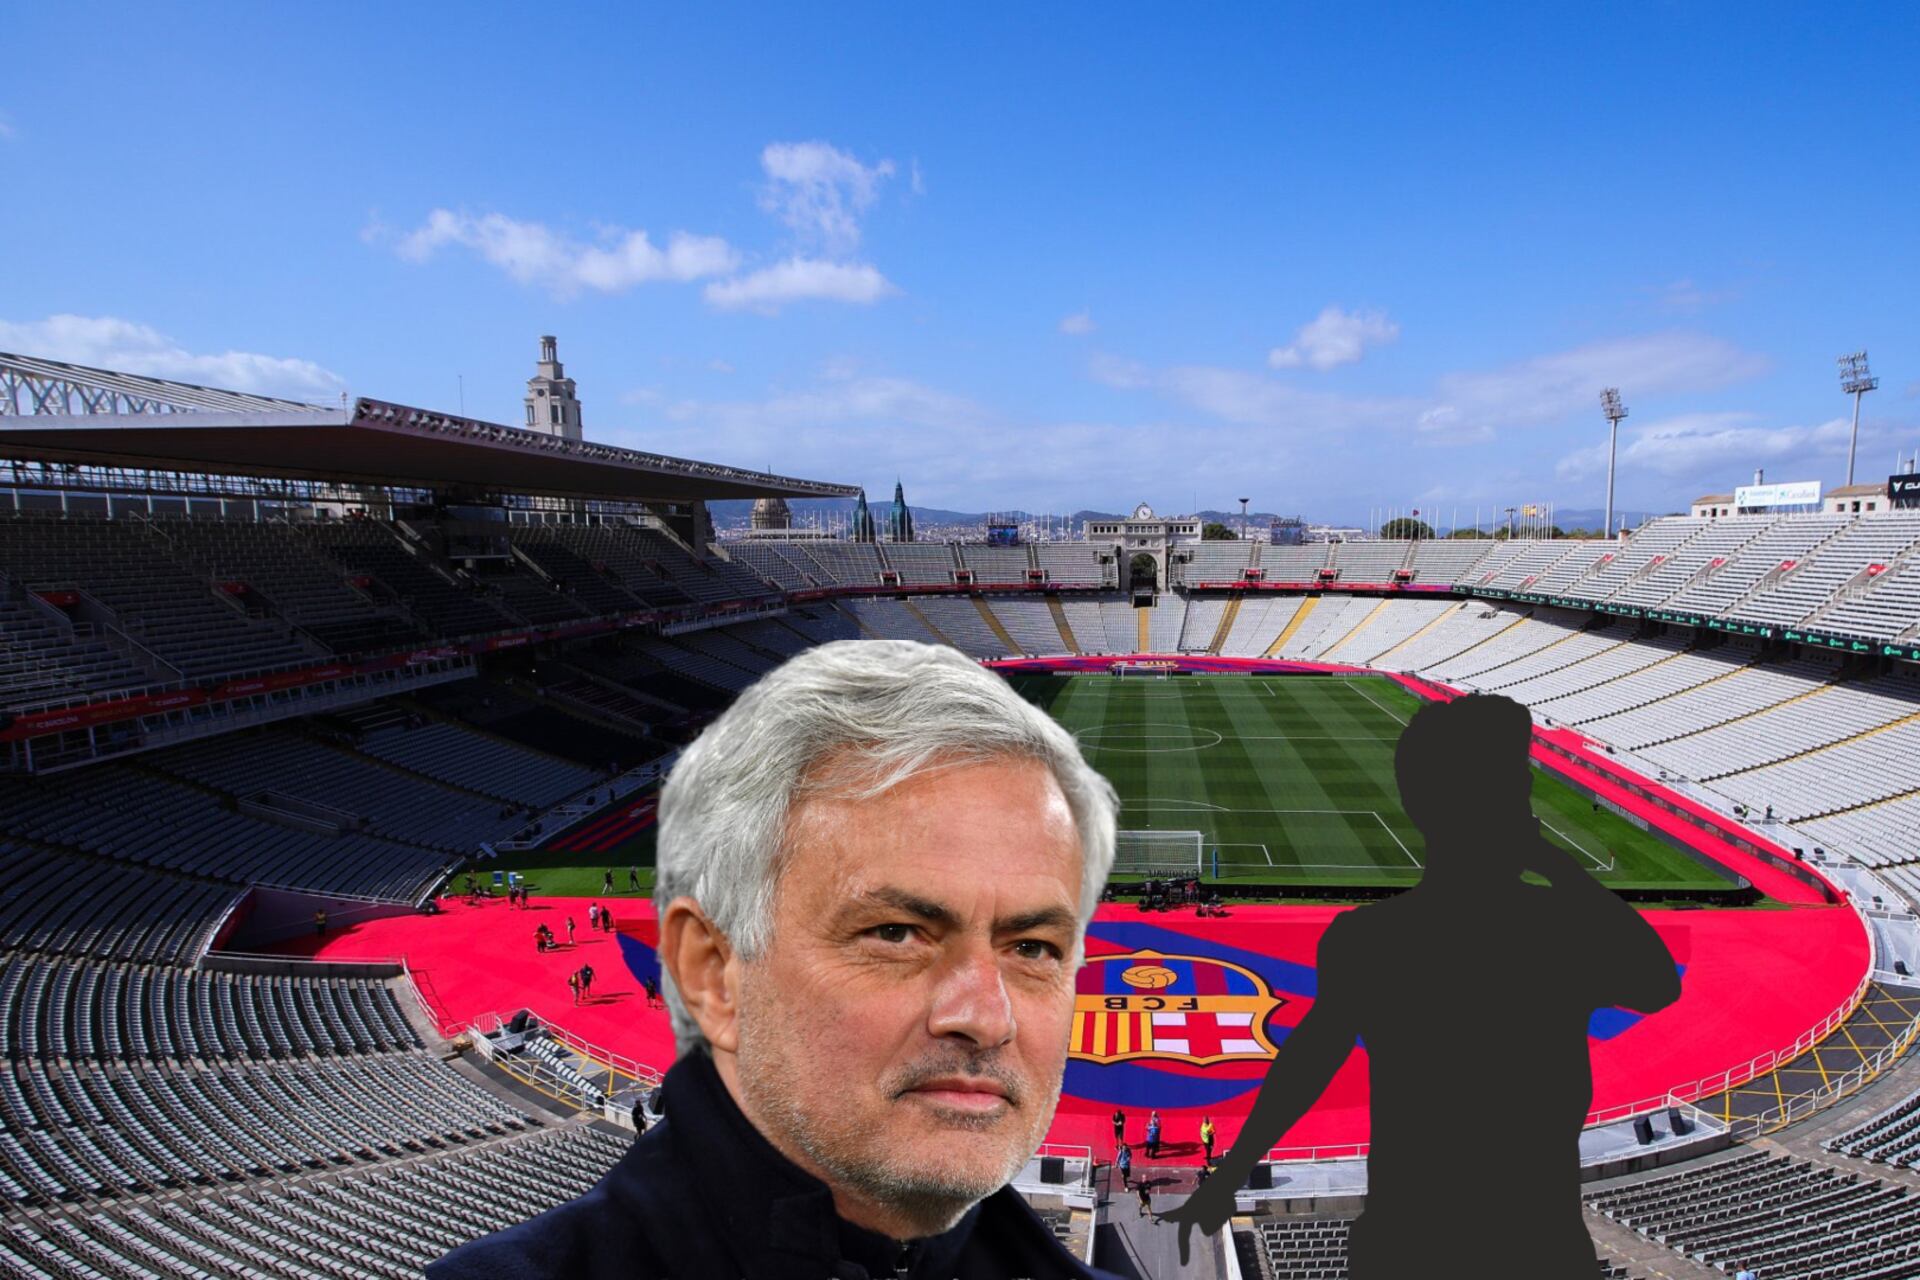 The first signing Mourinho would ask if he arrives to Barcelona, he coached him and he was the star of the team